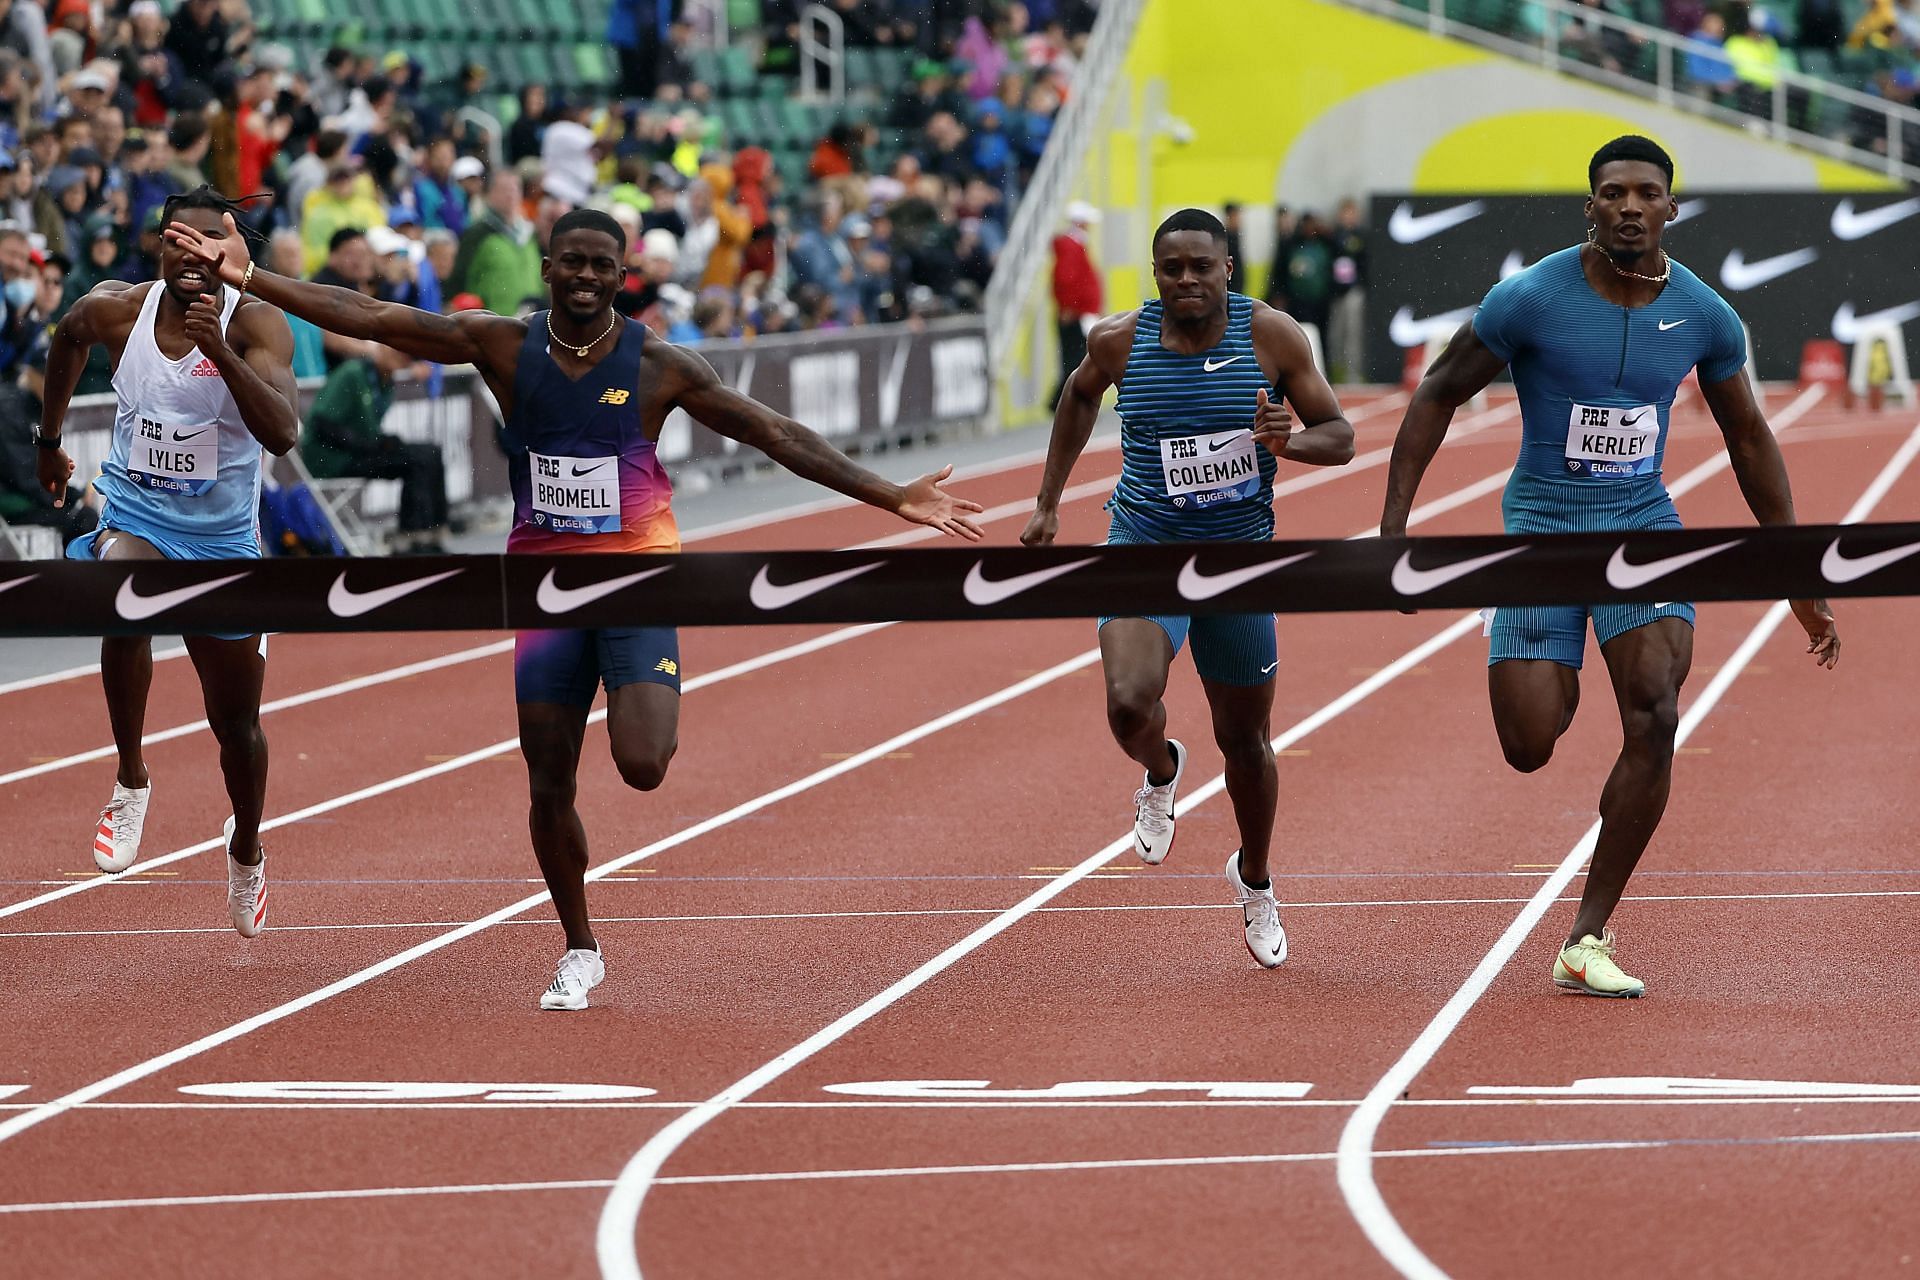 Trayvon Bromell wins the 100m at the Prefontaine Classic